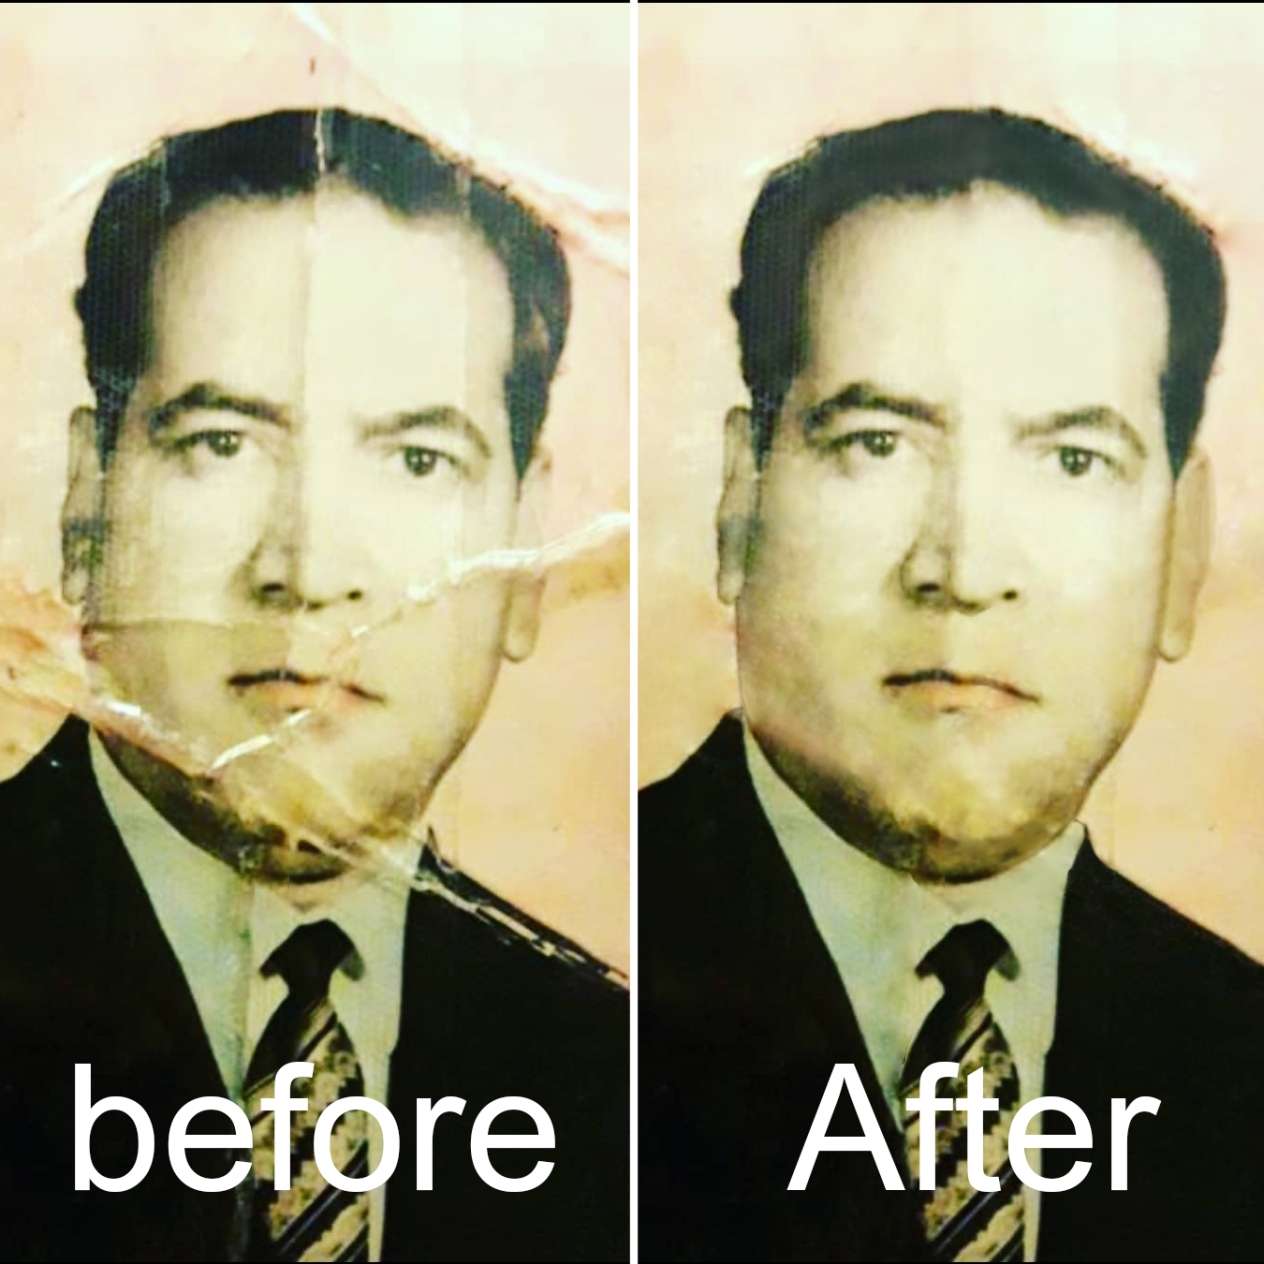 I will repair your old destroyed photos = 5$